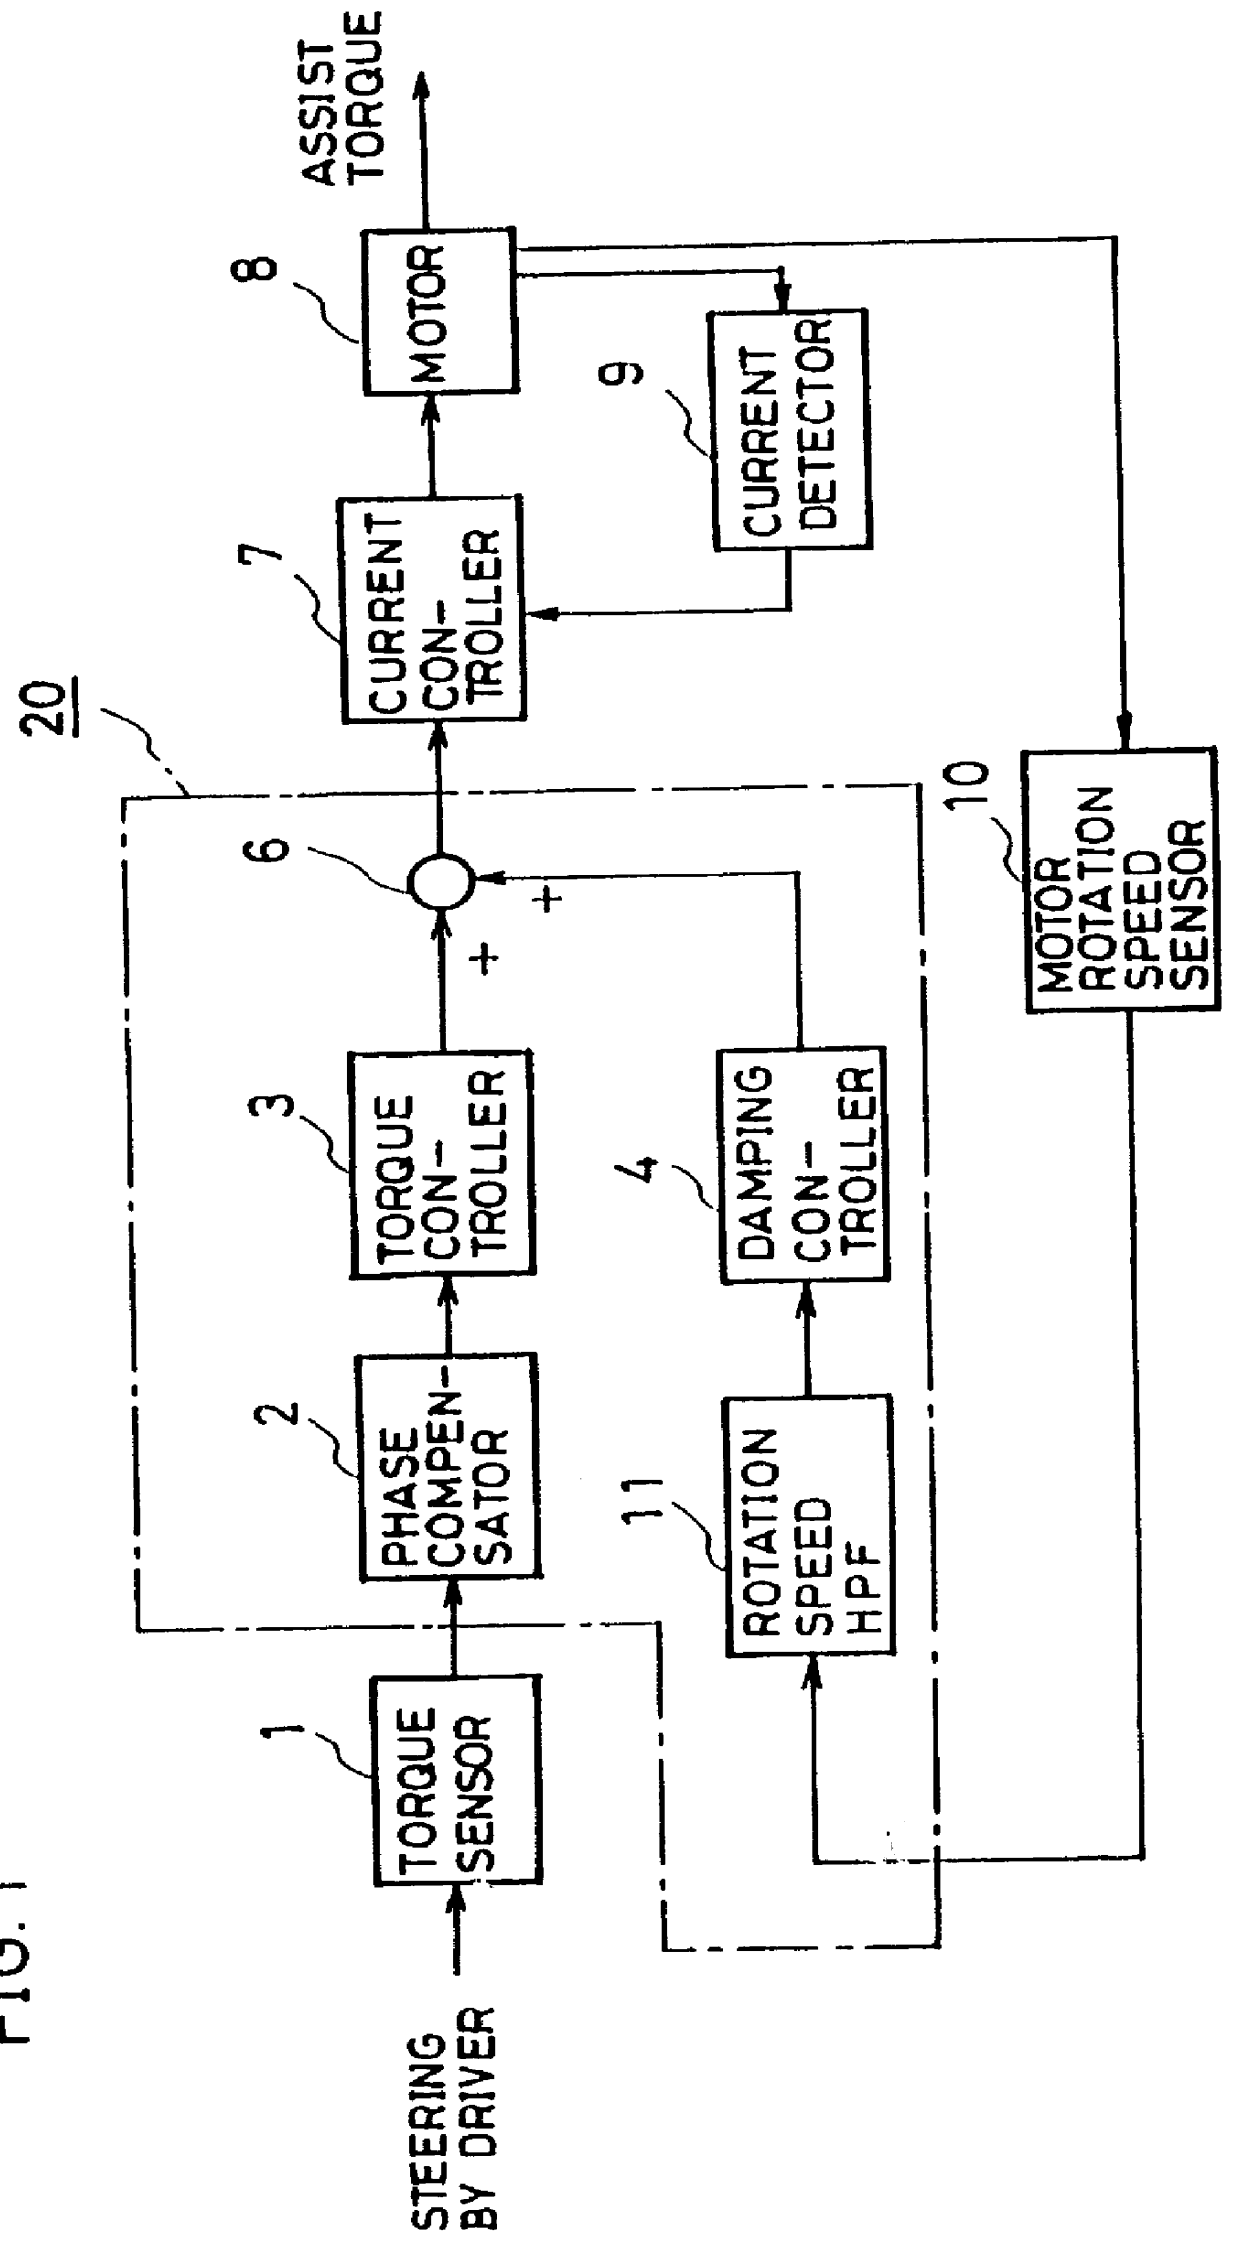 Electric power steering control system